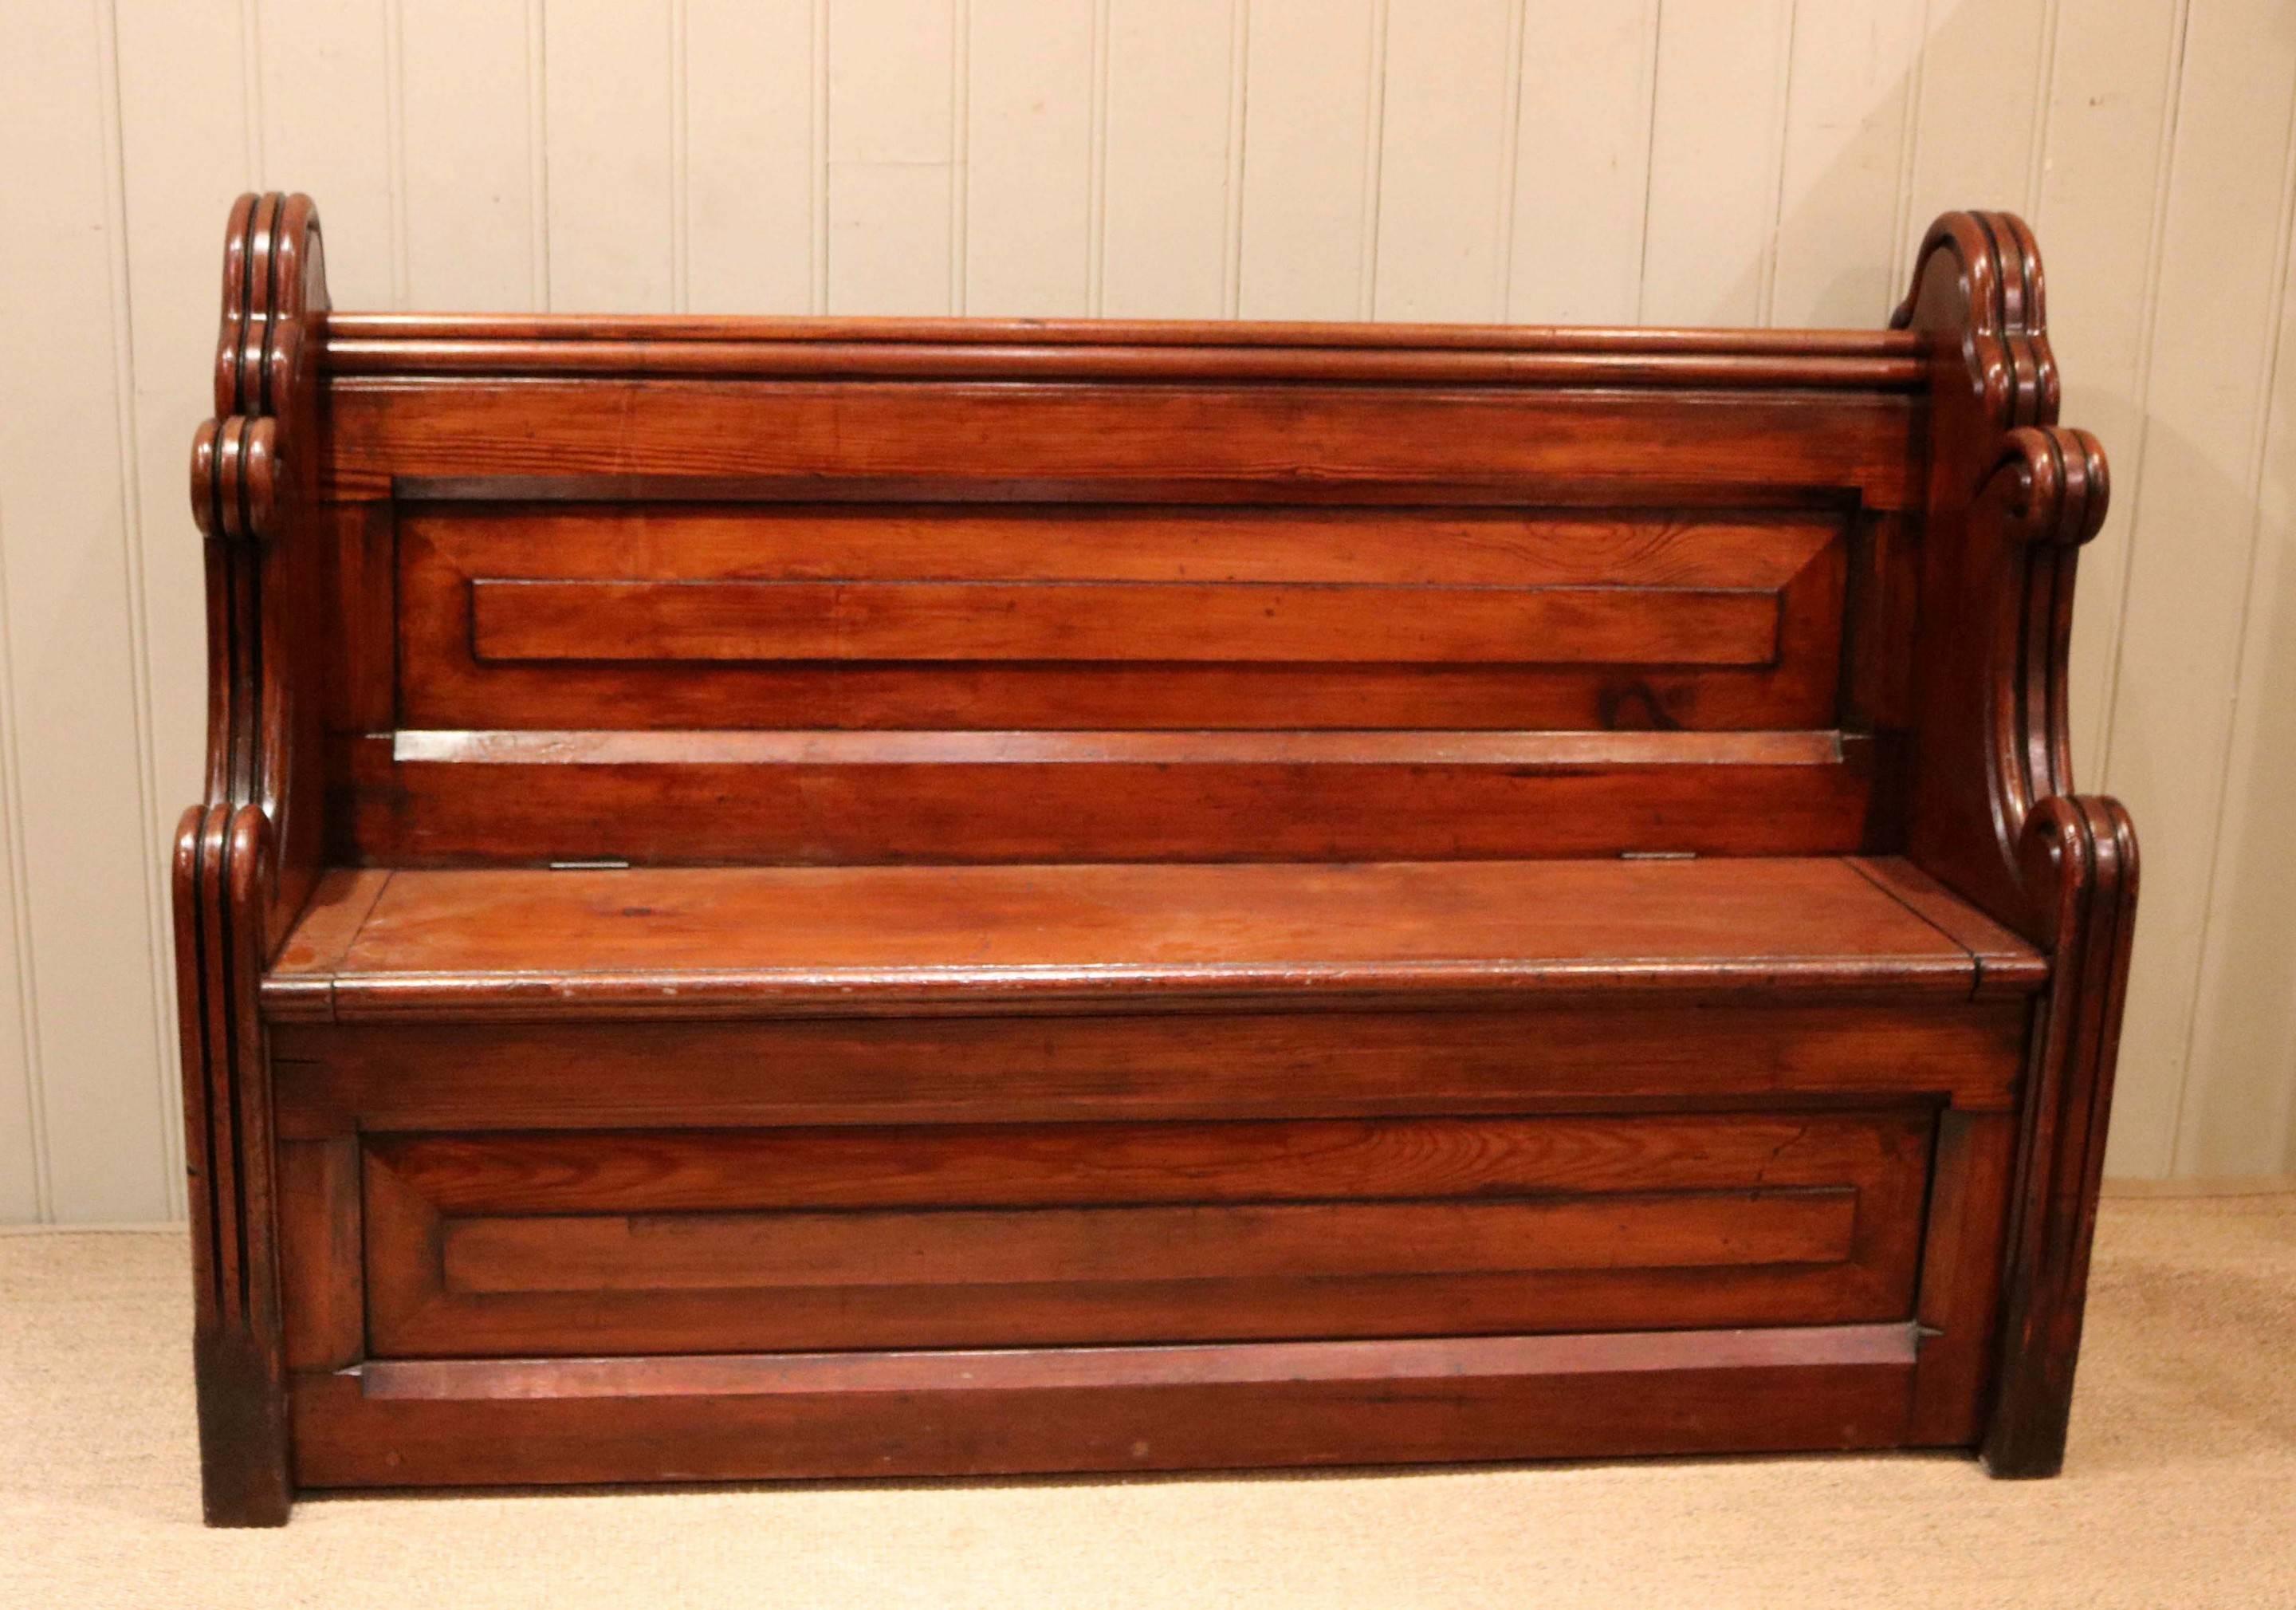 Substantial pitch pine pew having an unusual rolling curved detailing with a box base. This pew was salvaged from a church in the Lancashire area.